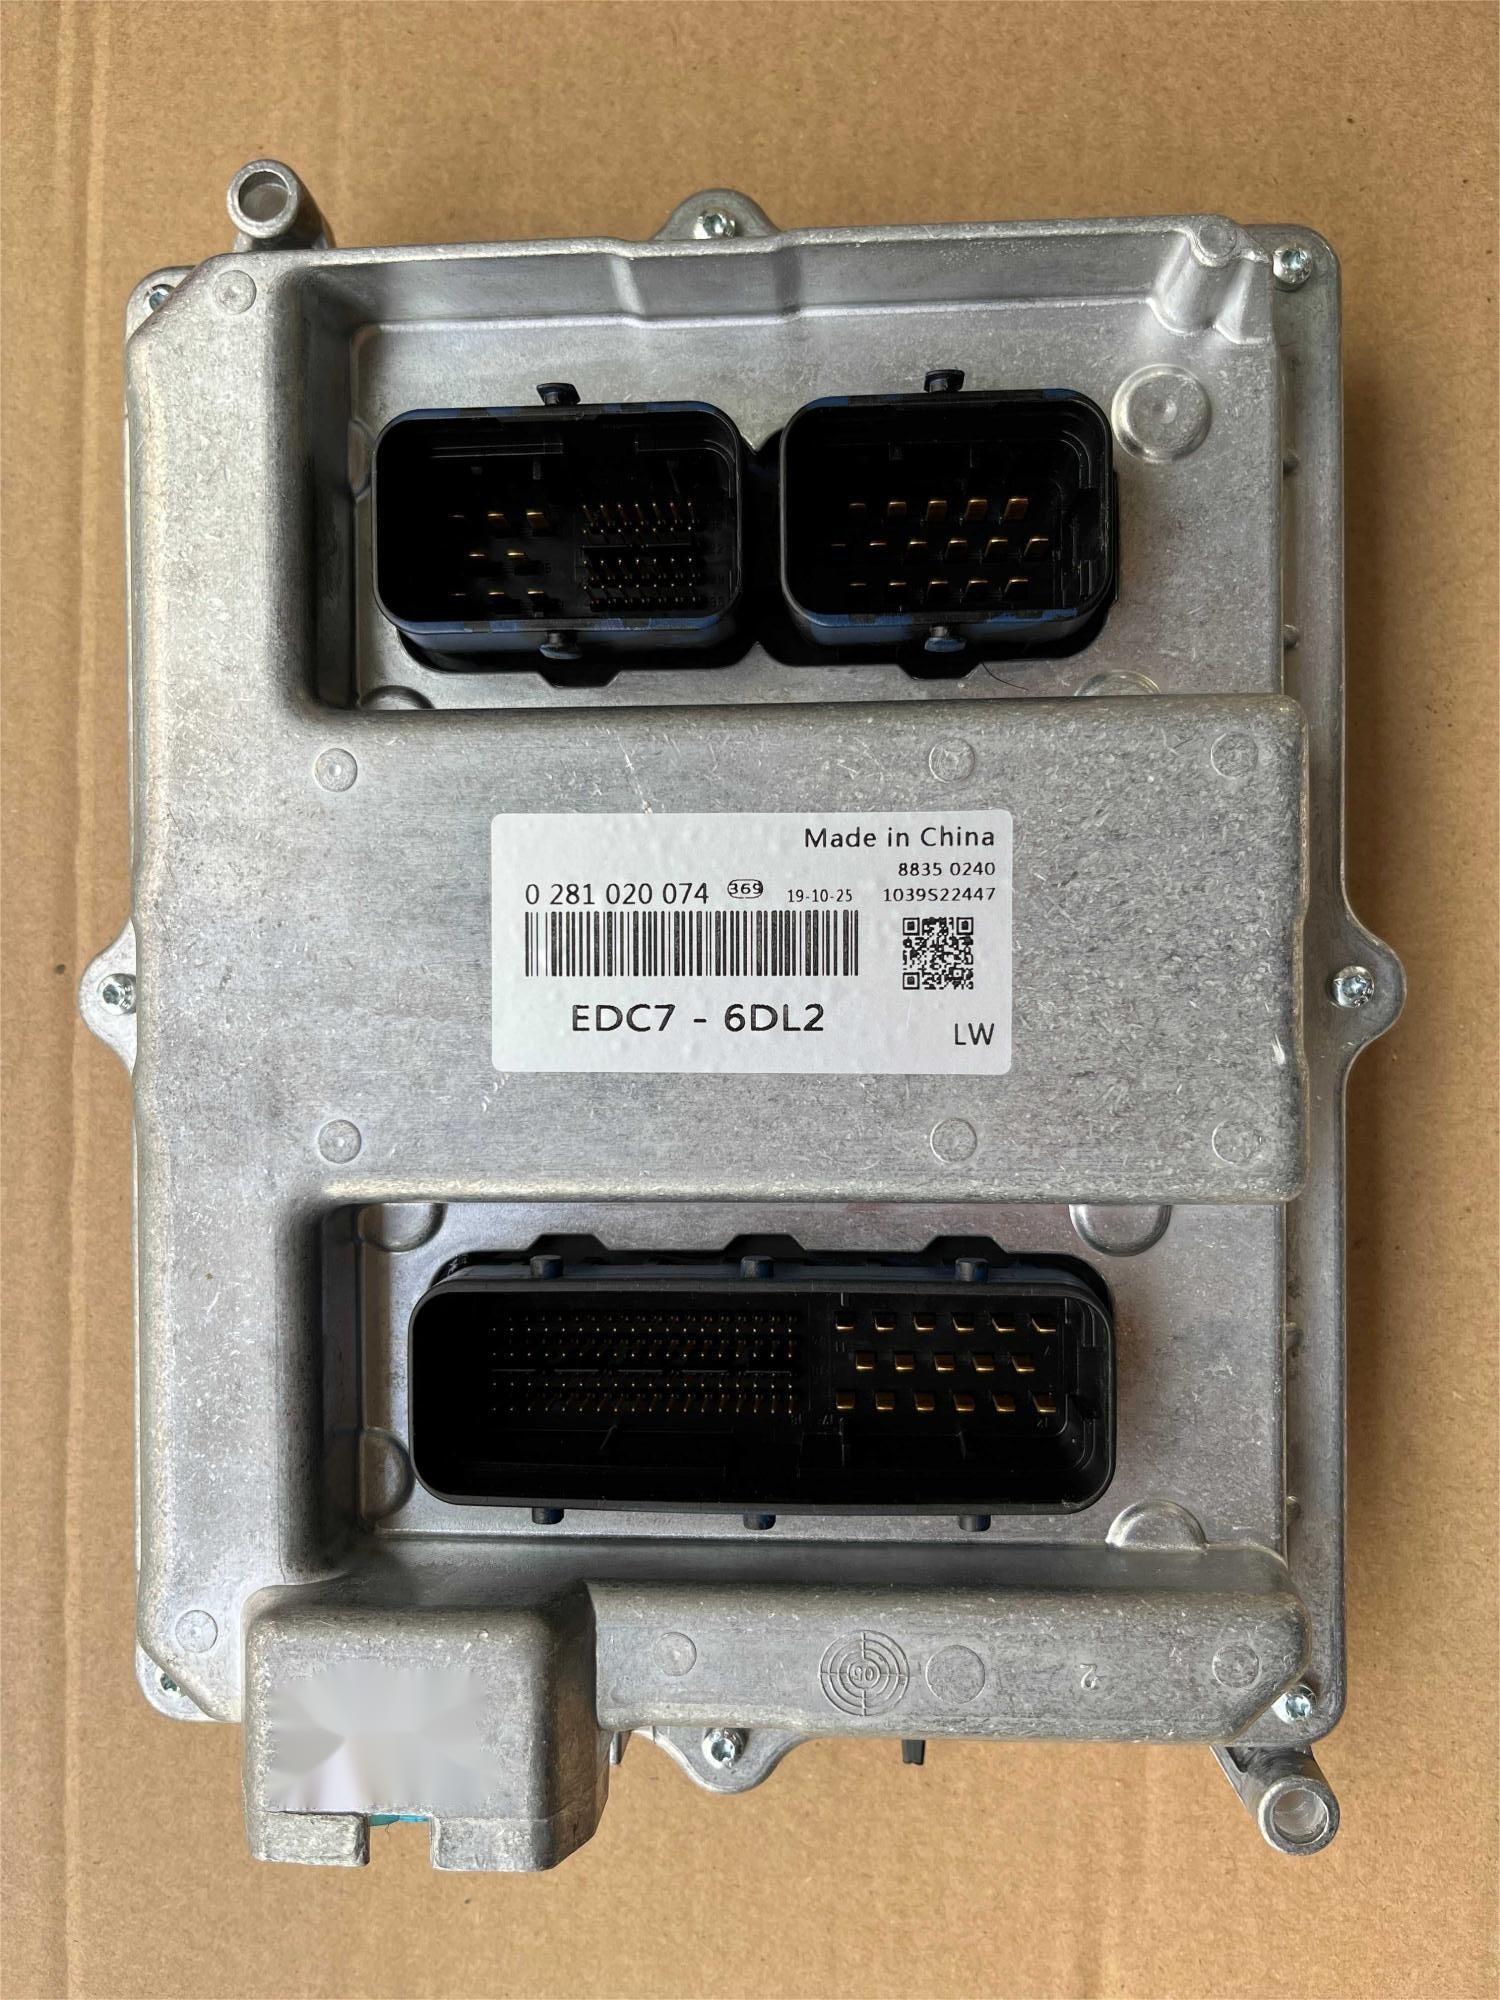 OEM: 0281020074 EDC7-6DL2 Material: Metal Color: Silver Origin: Made in China Weight: 1500g Packing List: 1*  Used ECU Diesel Engine  More Service We can provide OEM Manufacturing service We can Be your one-step solution for Auto Parts We can provide technical scheme for you  Feel Free to Contact Us, We will get back to you as soon as possible.